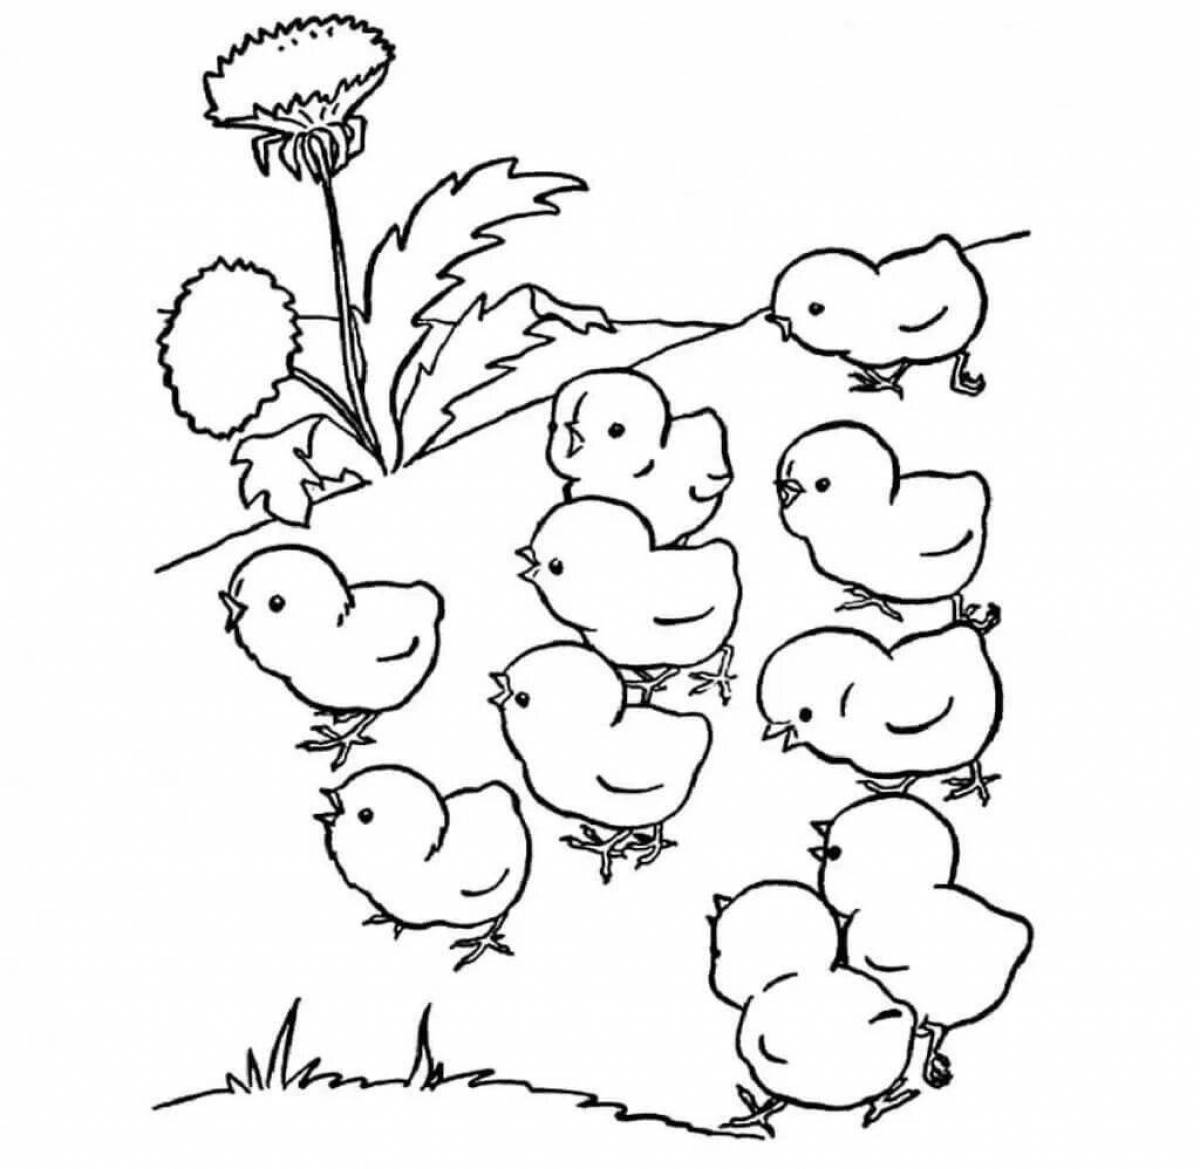 Chubby chick coloring page